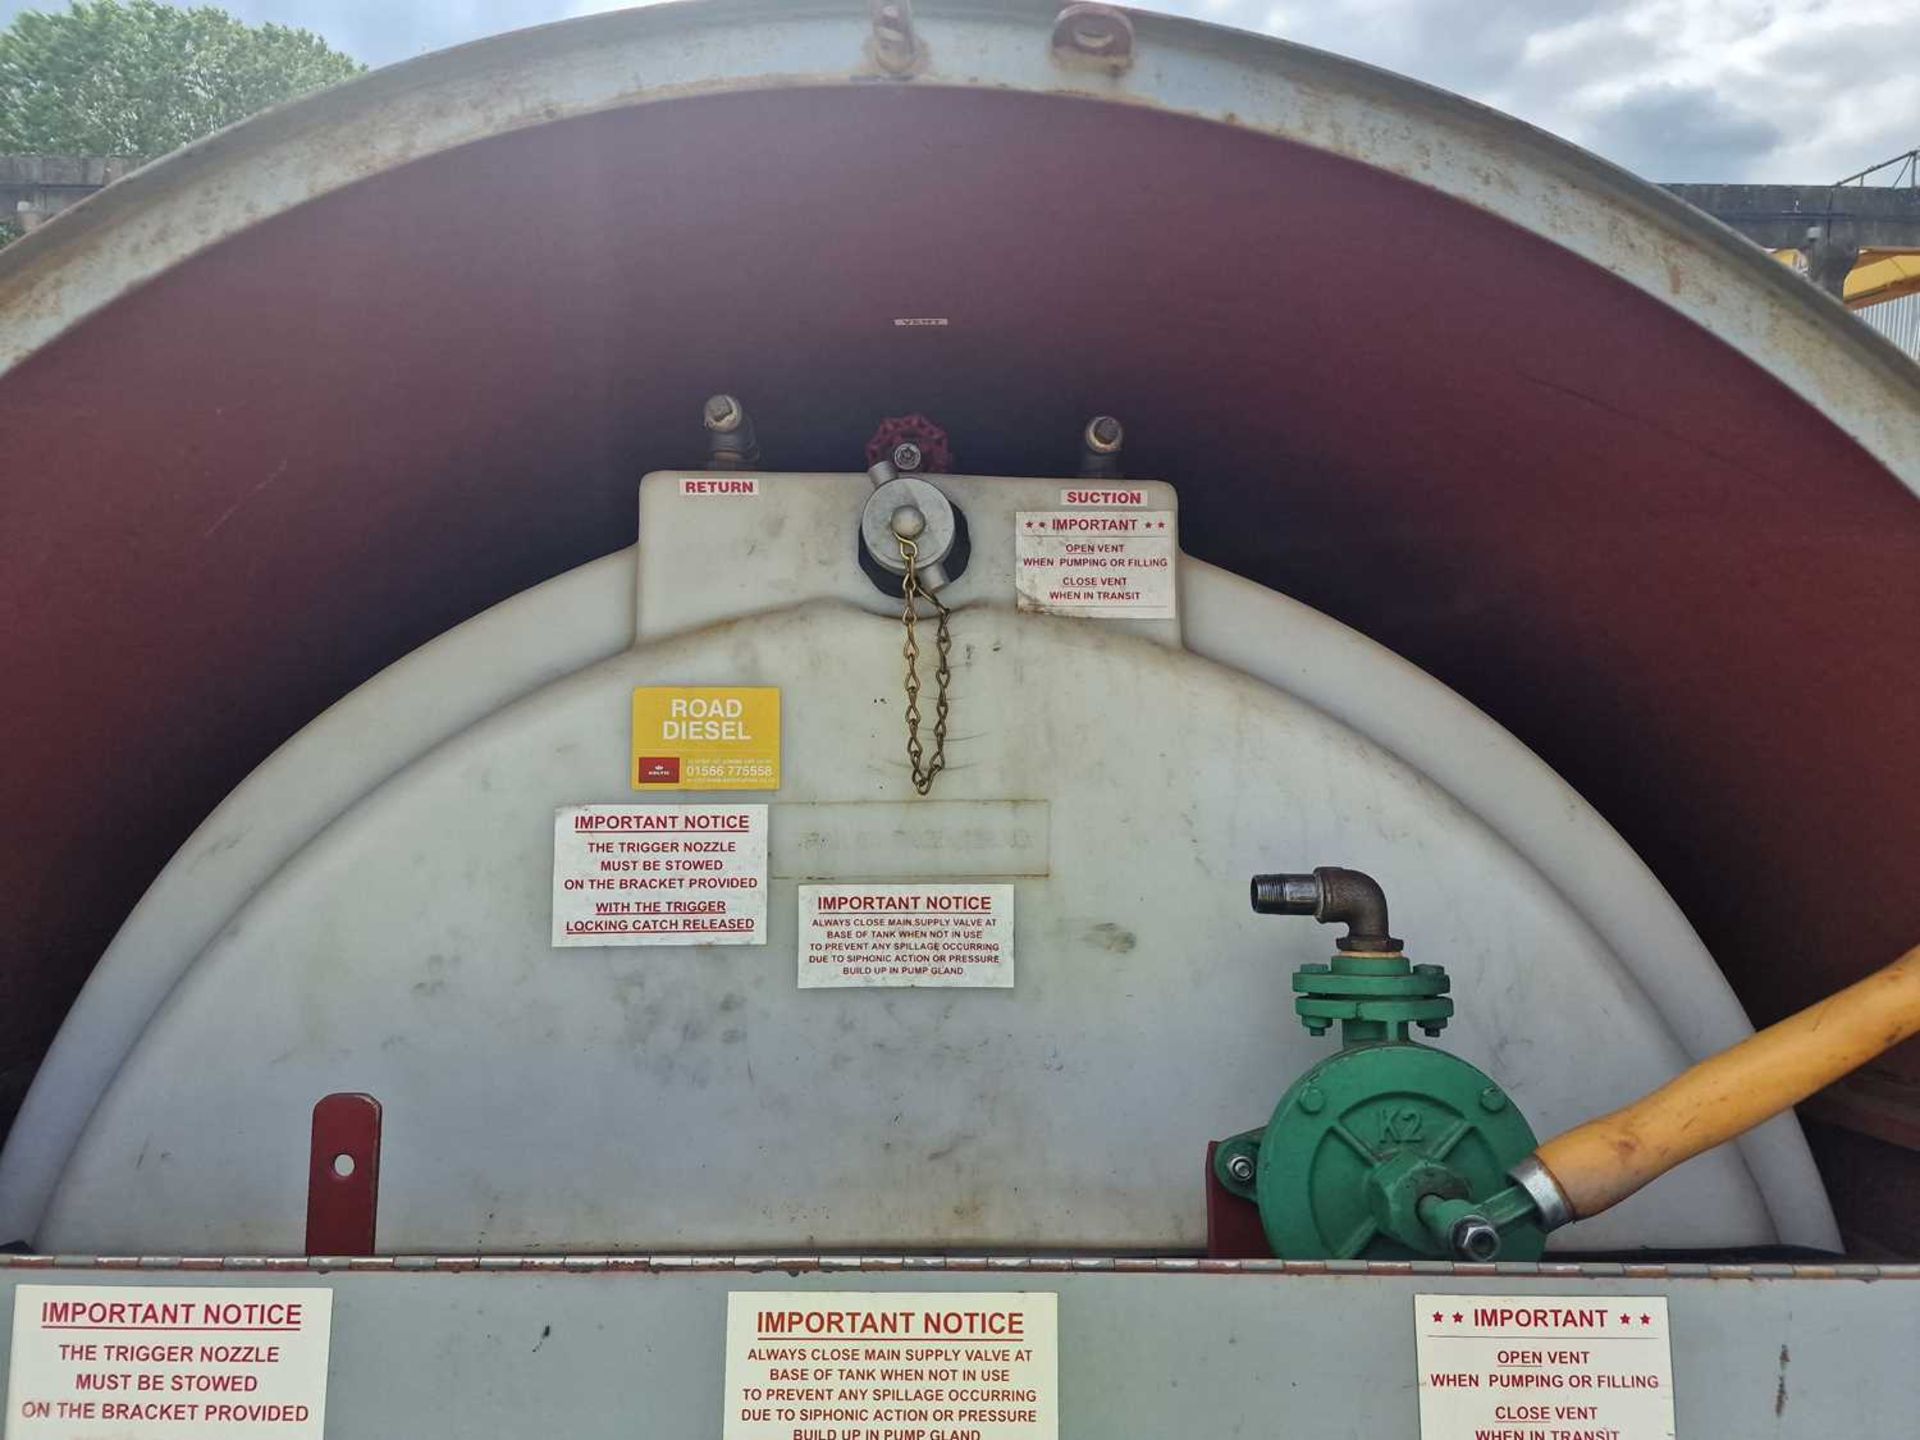 2021 Trailer Engineering 2140 Litre Single Axle Bunded Fuel Bowser, Manual Pump - Image 17 of 18